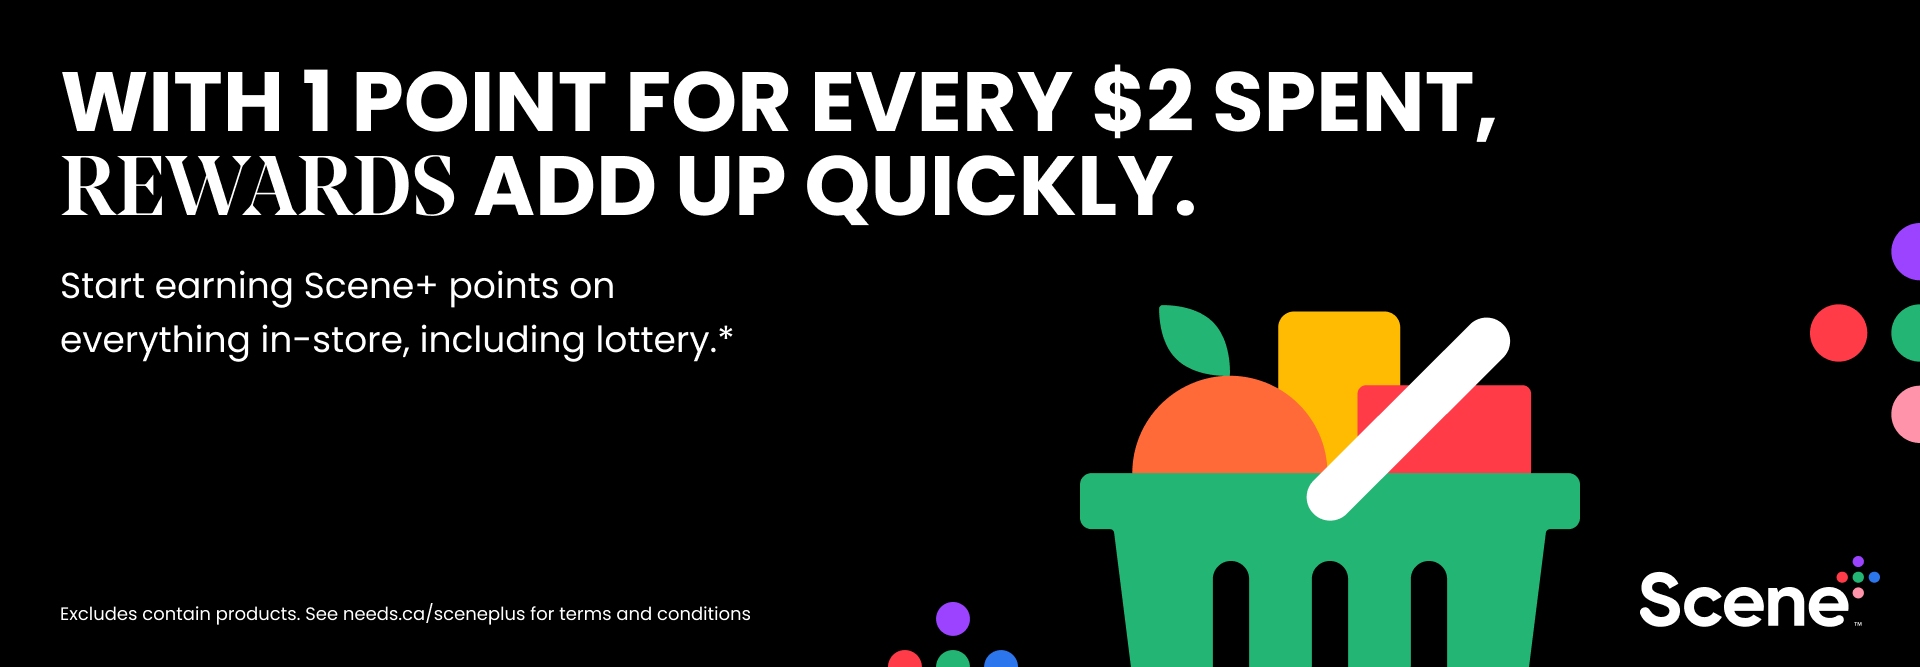 Text Reading 'With 1 point for every $2 spent, Rewards add up quickly. Start earning scene+ points on everything in-store,including lottery. Excludes contain products. See needs.ca/sceneplus for terms and conditions.'